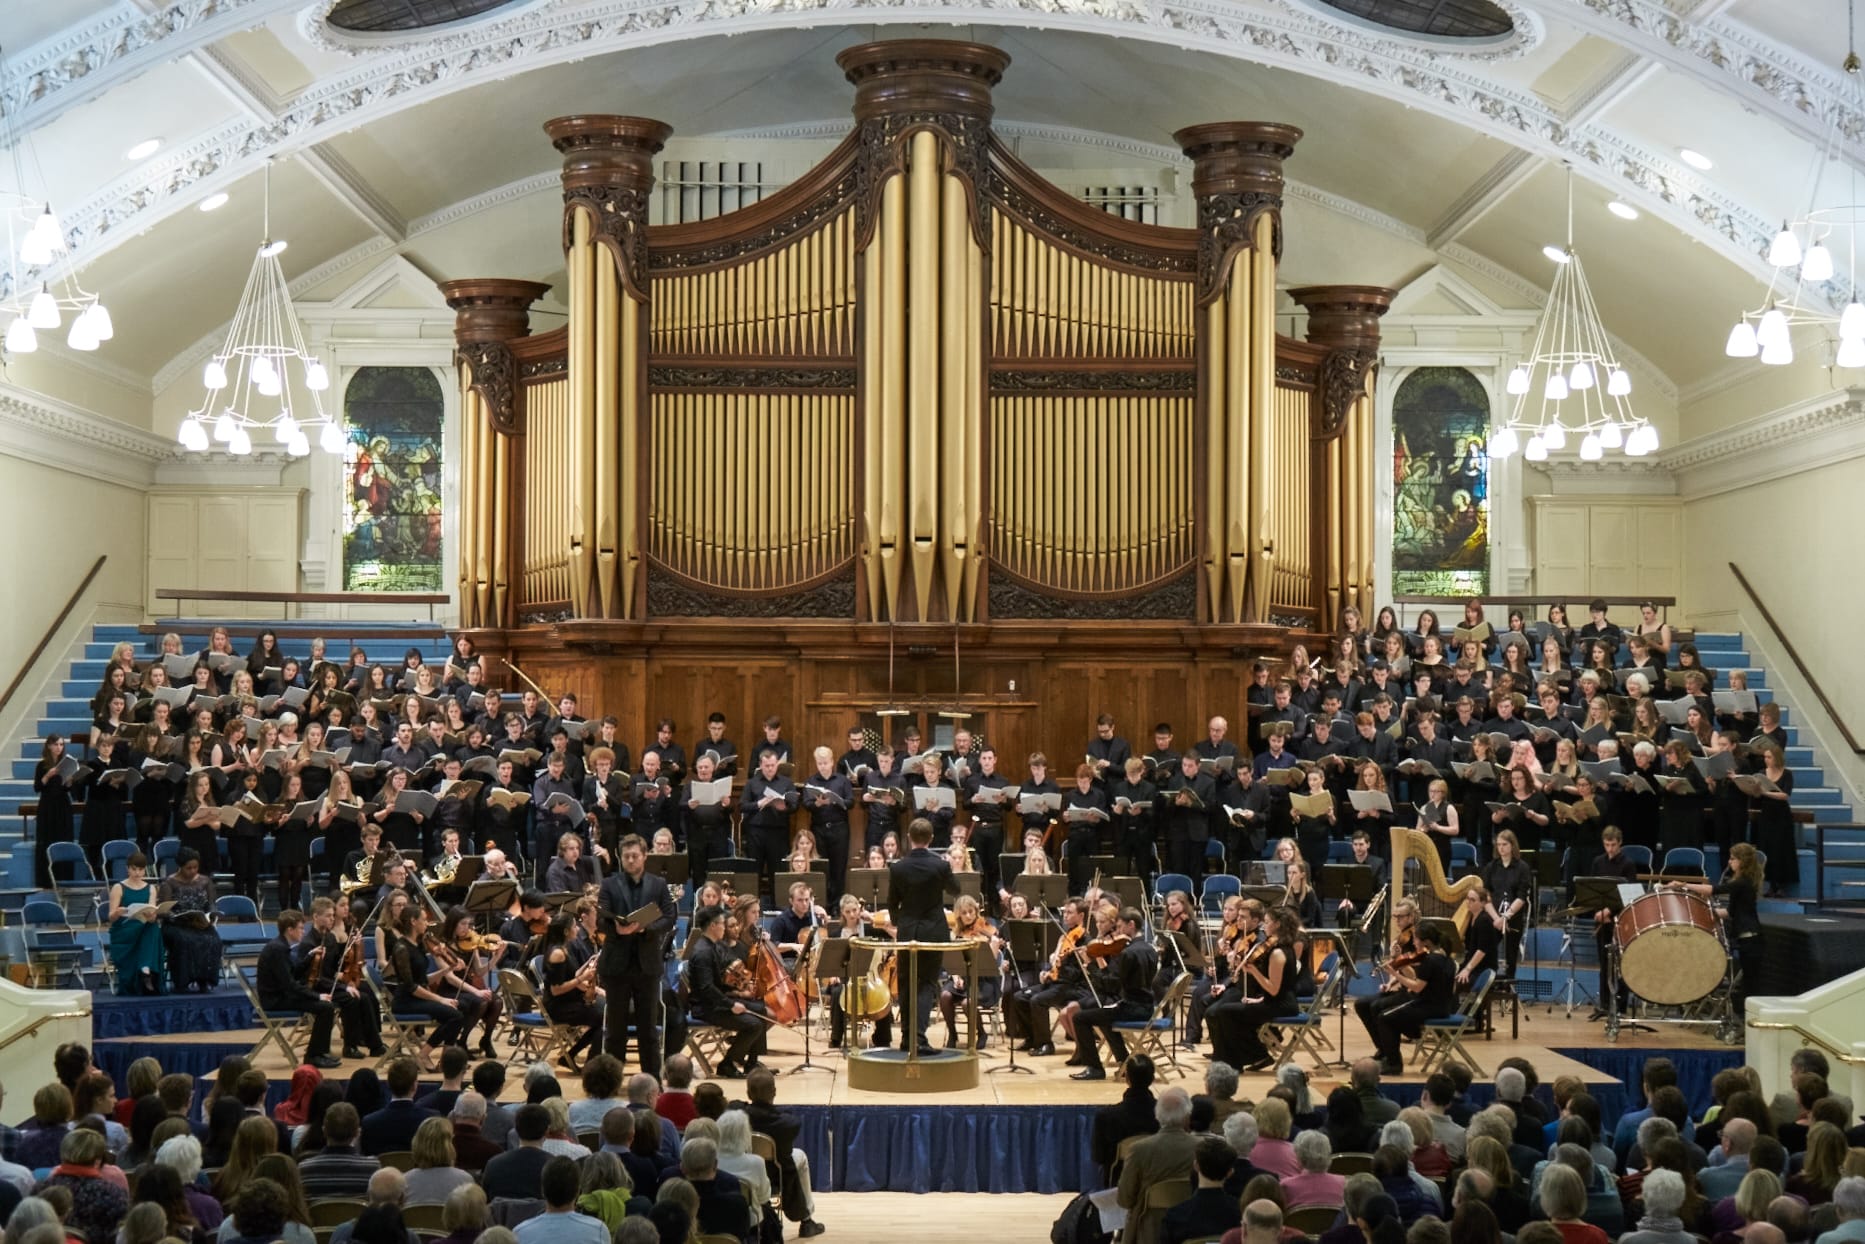 a full orchestra perform in a large space with an imposing organ behind them